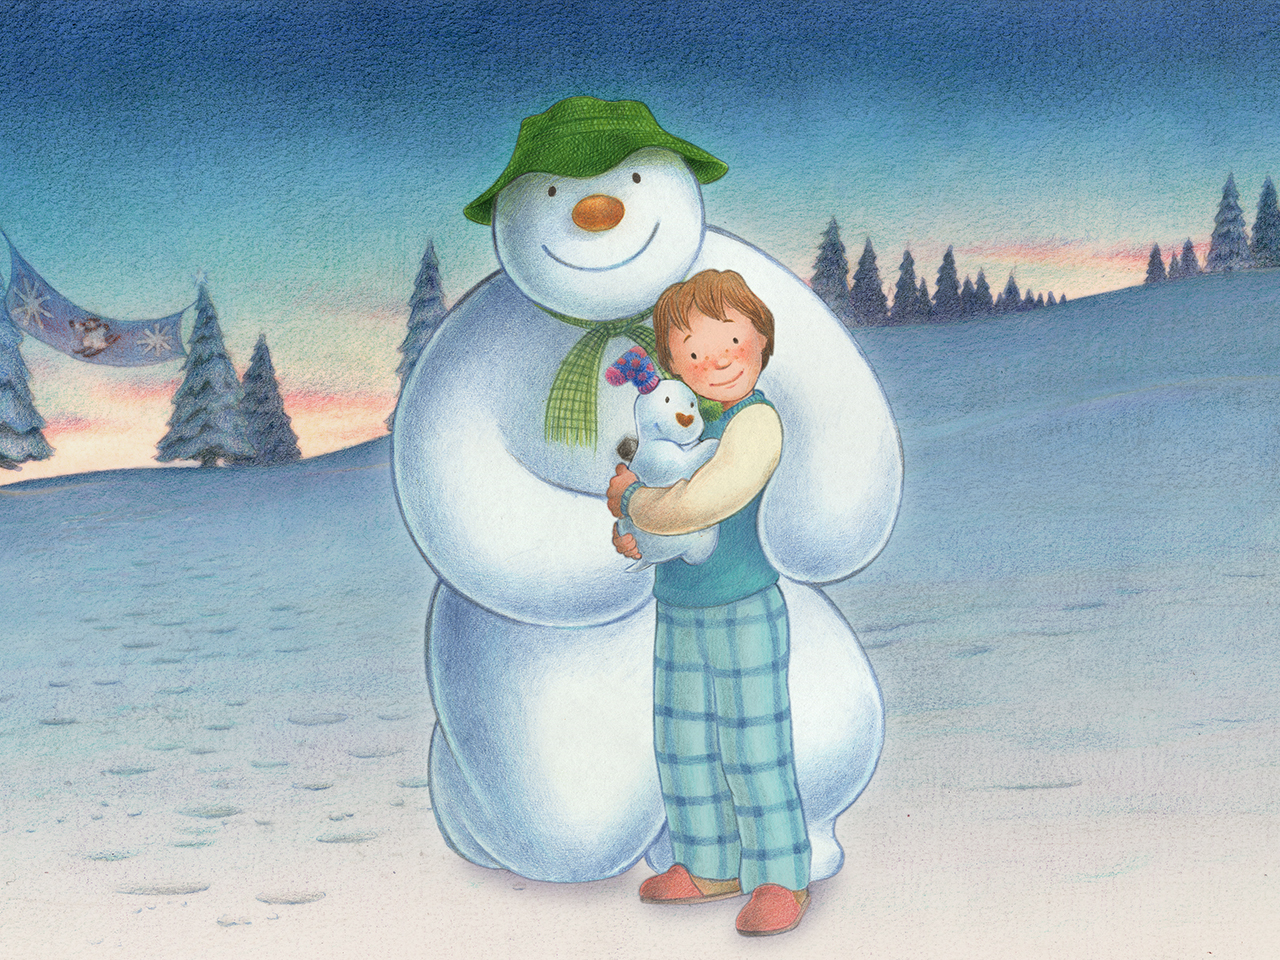 An image of the Snowman and the boy, the boy is holding the Snowdog, against a wintery landscape